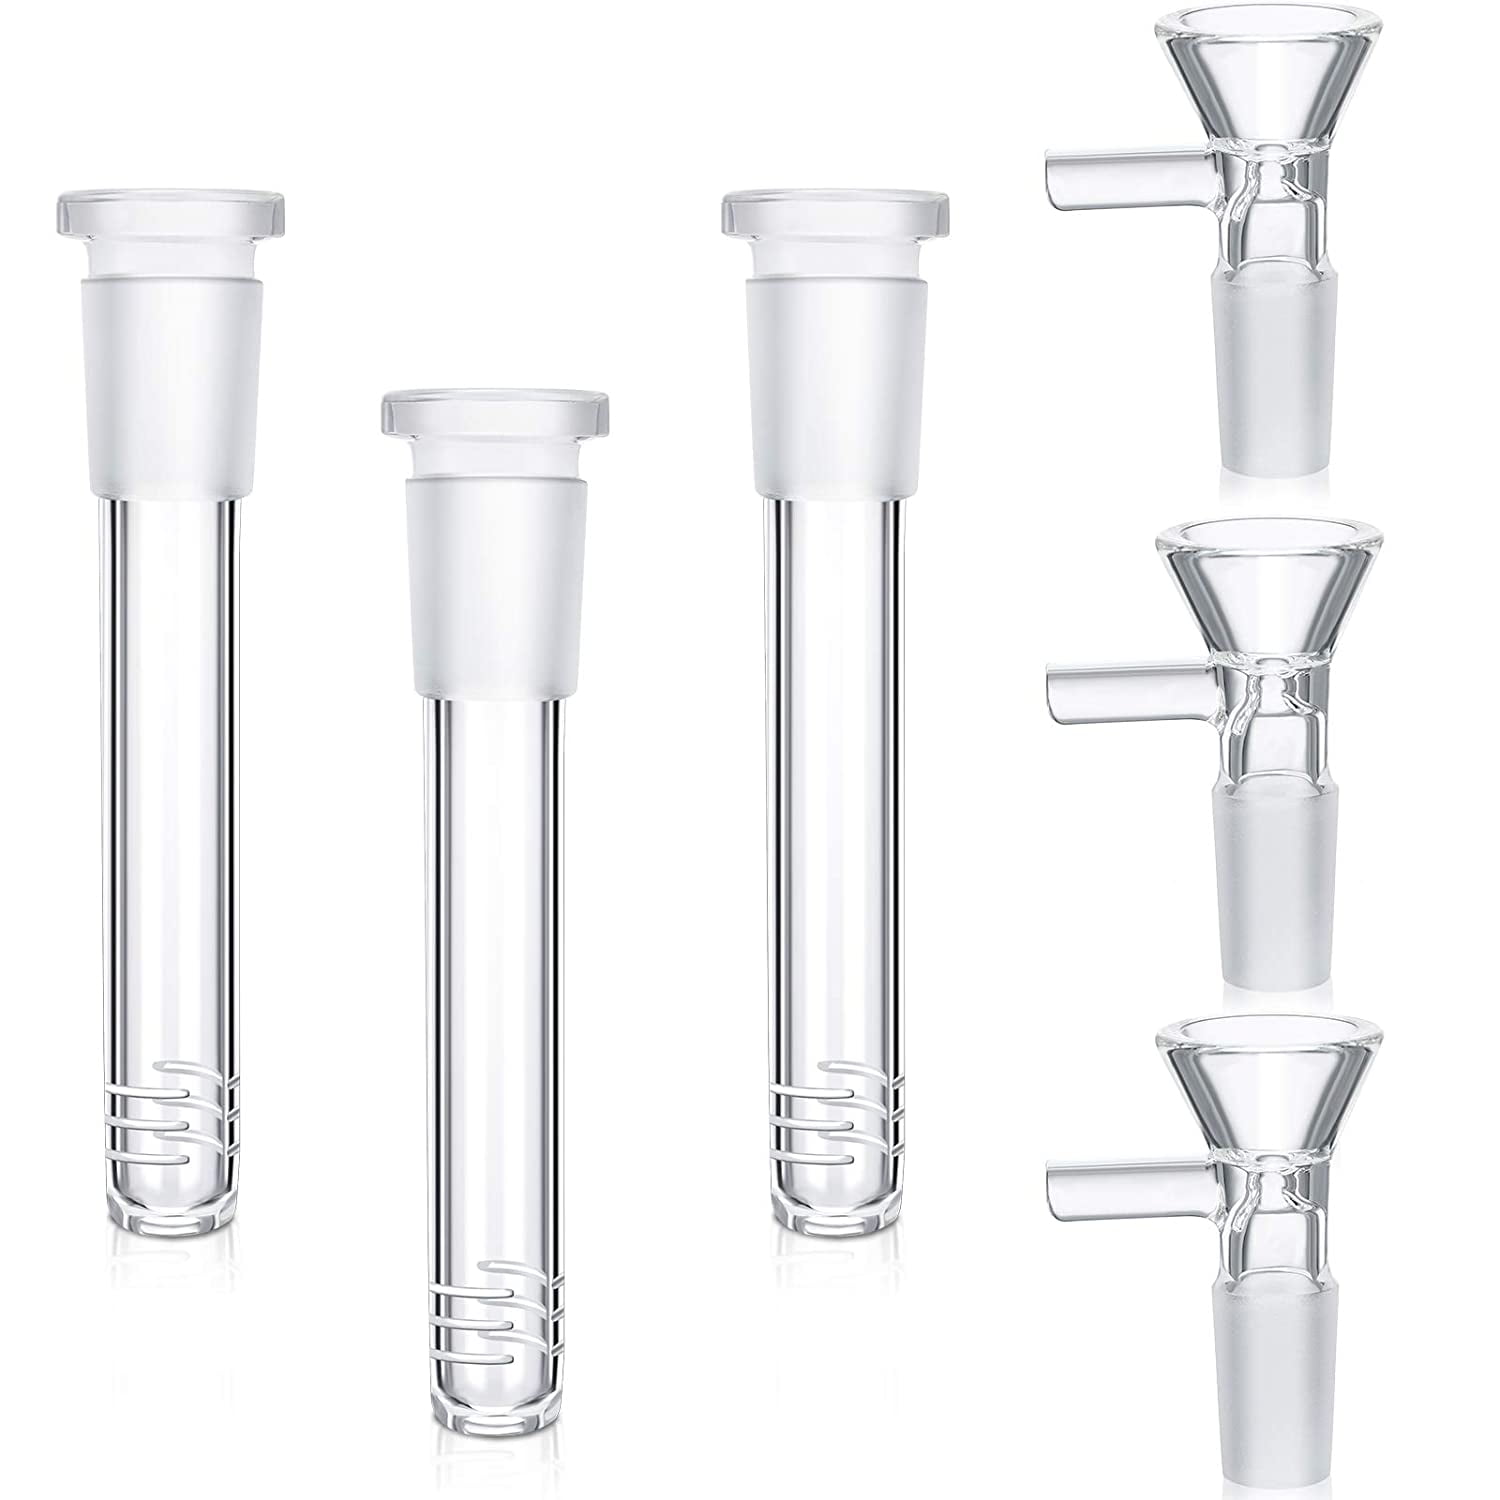 3 Pieces Male Glass Funnel Adapter Handmade Clear Bowl Holder for Science and Lab Experiments 14 mm/ 0.56 Inch 